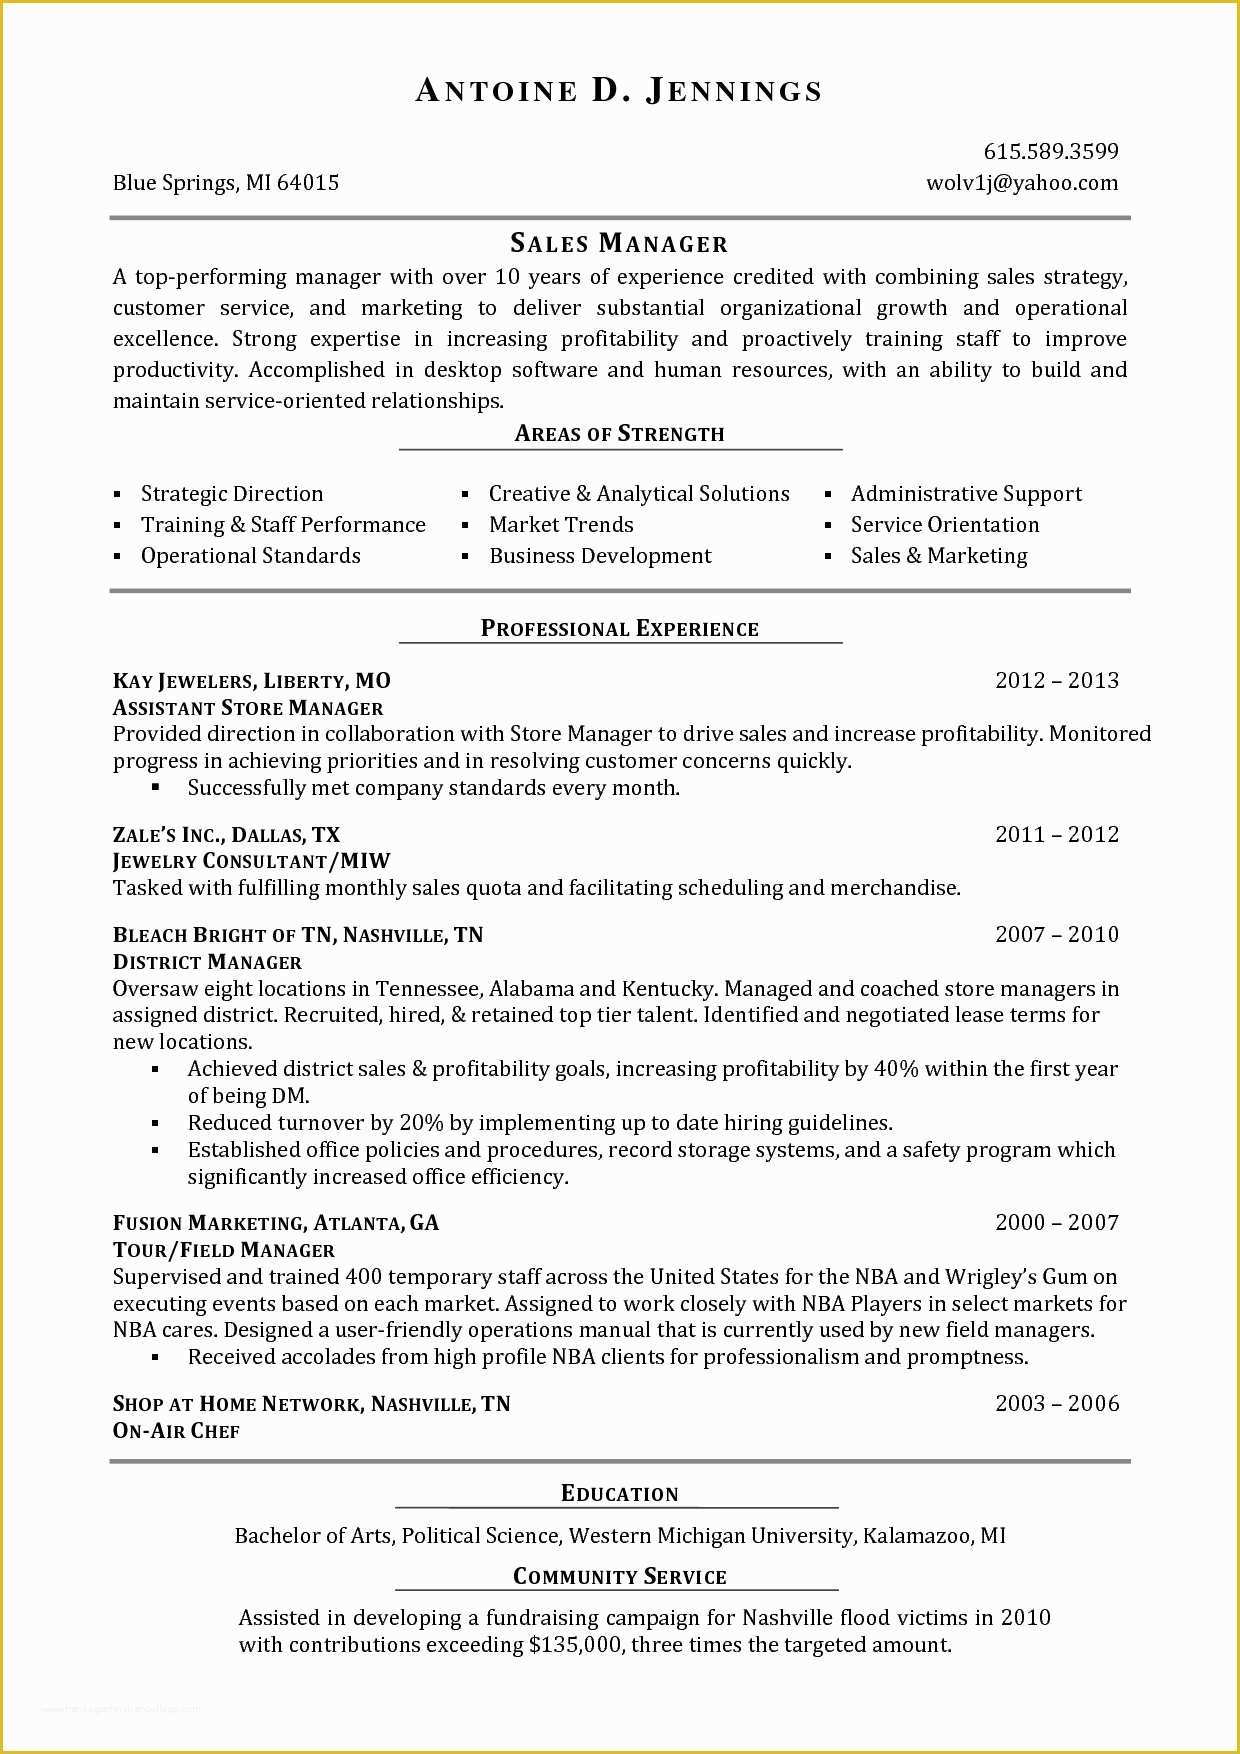 Free Sales Manager Resume Templates Of Fine Desktop Manager Resume S Simple Resume